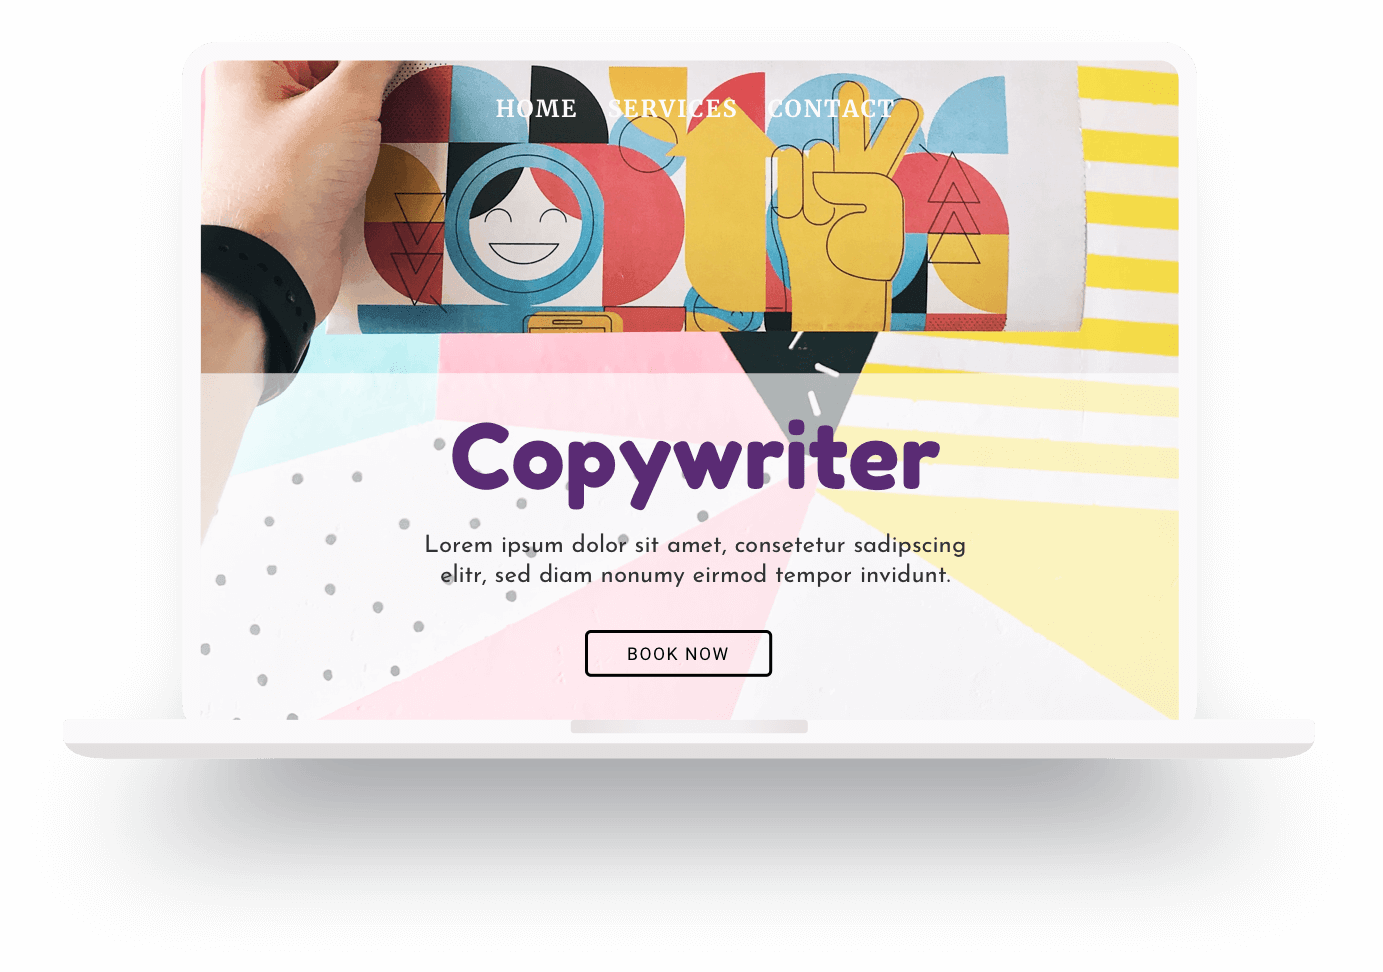 Example of a freelance copywriter website built with Jimdo